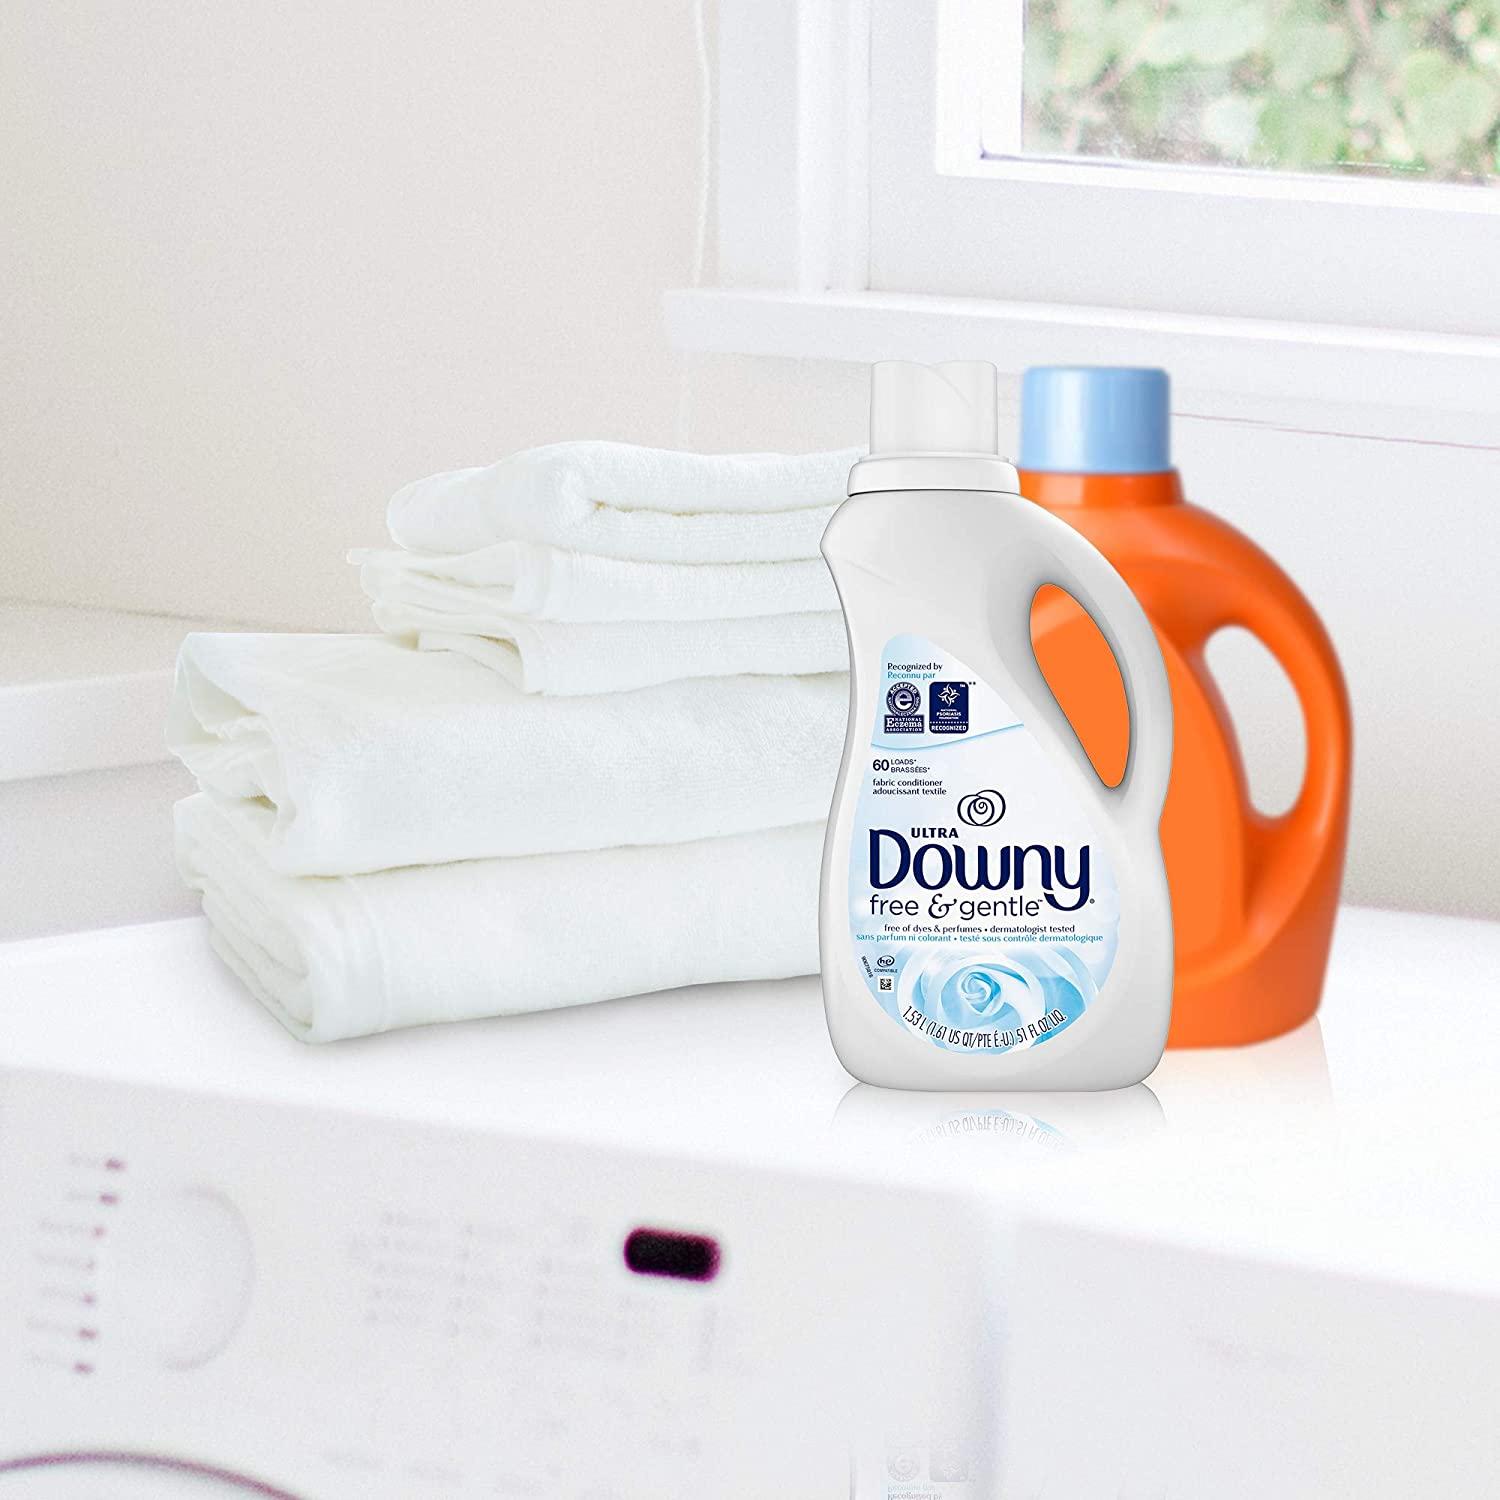 EWG's Guide to Healthy Cleaning  Downy Ultra Liquid Fabric Conditioner,  Free & Gentle Cleaner Rating